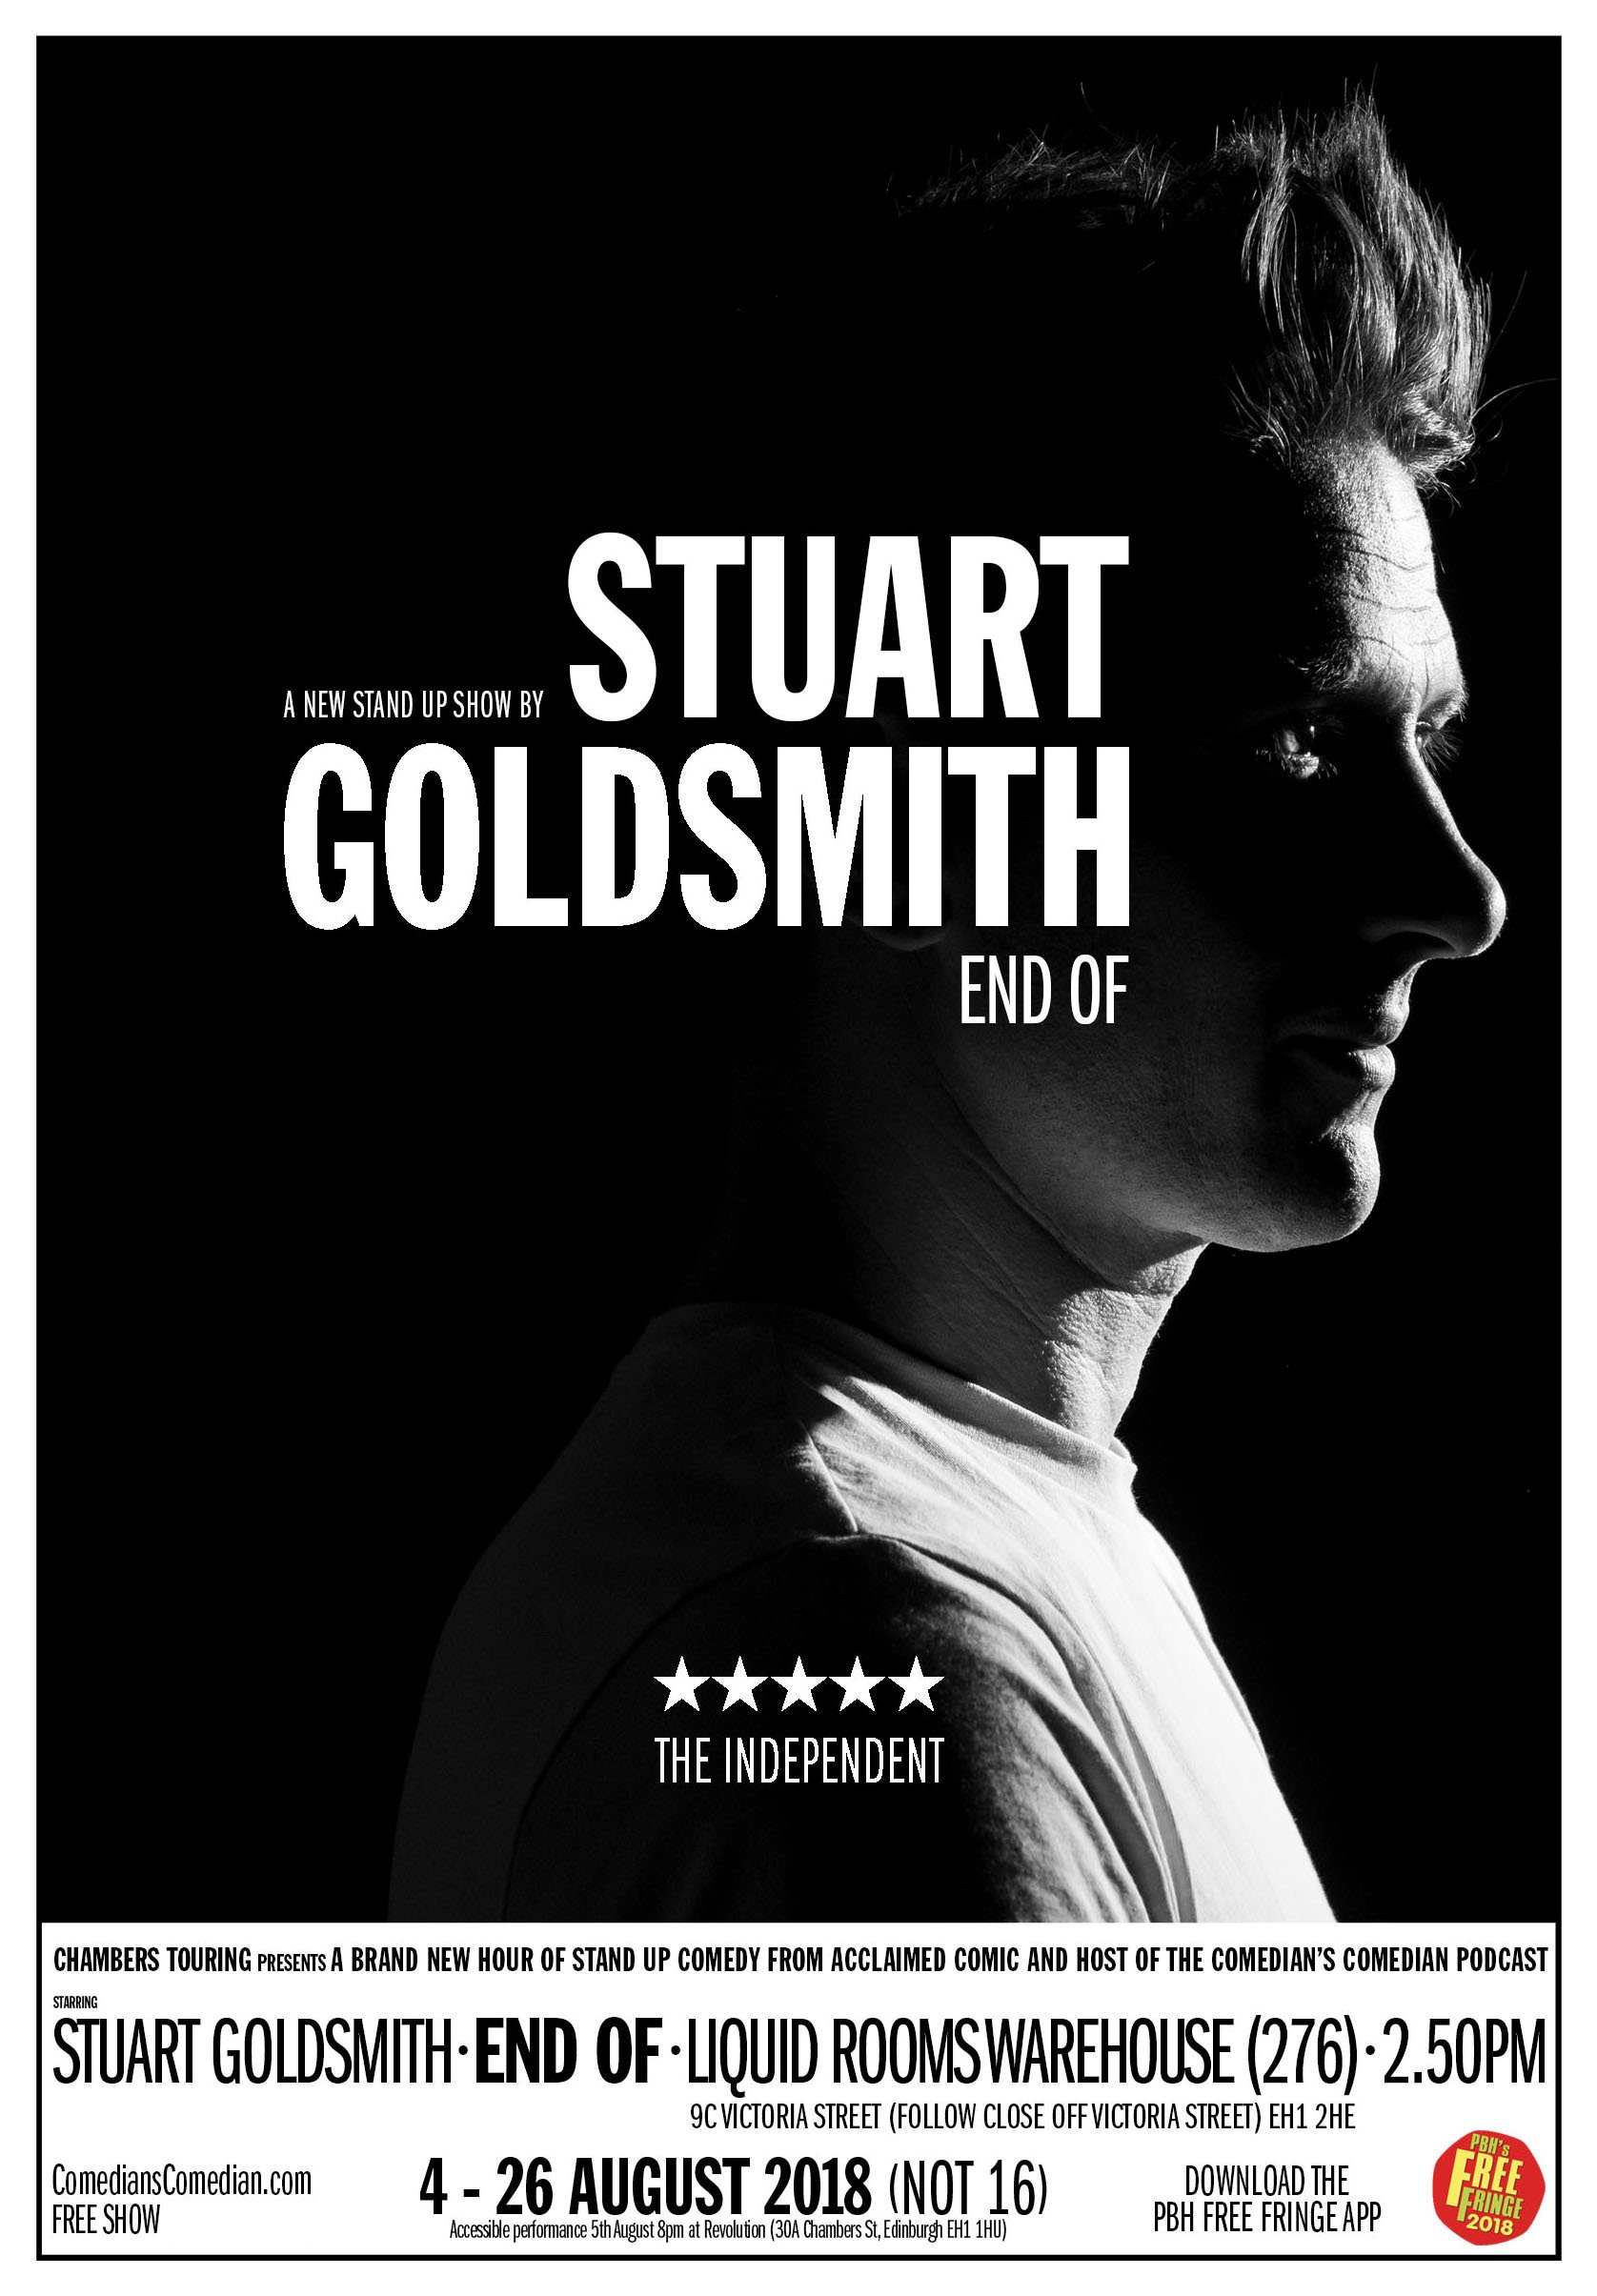 The poster for Stuart Goldsmith: End Of